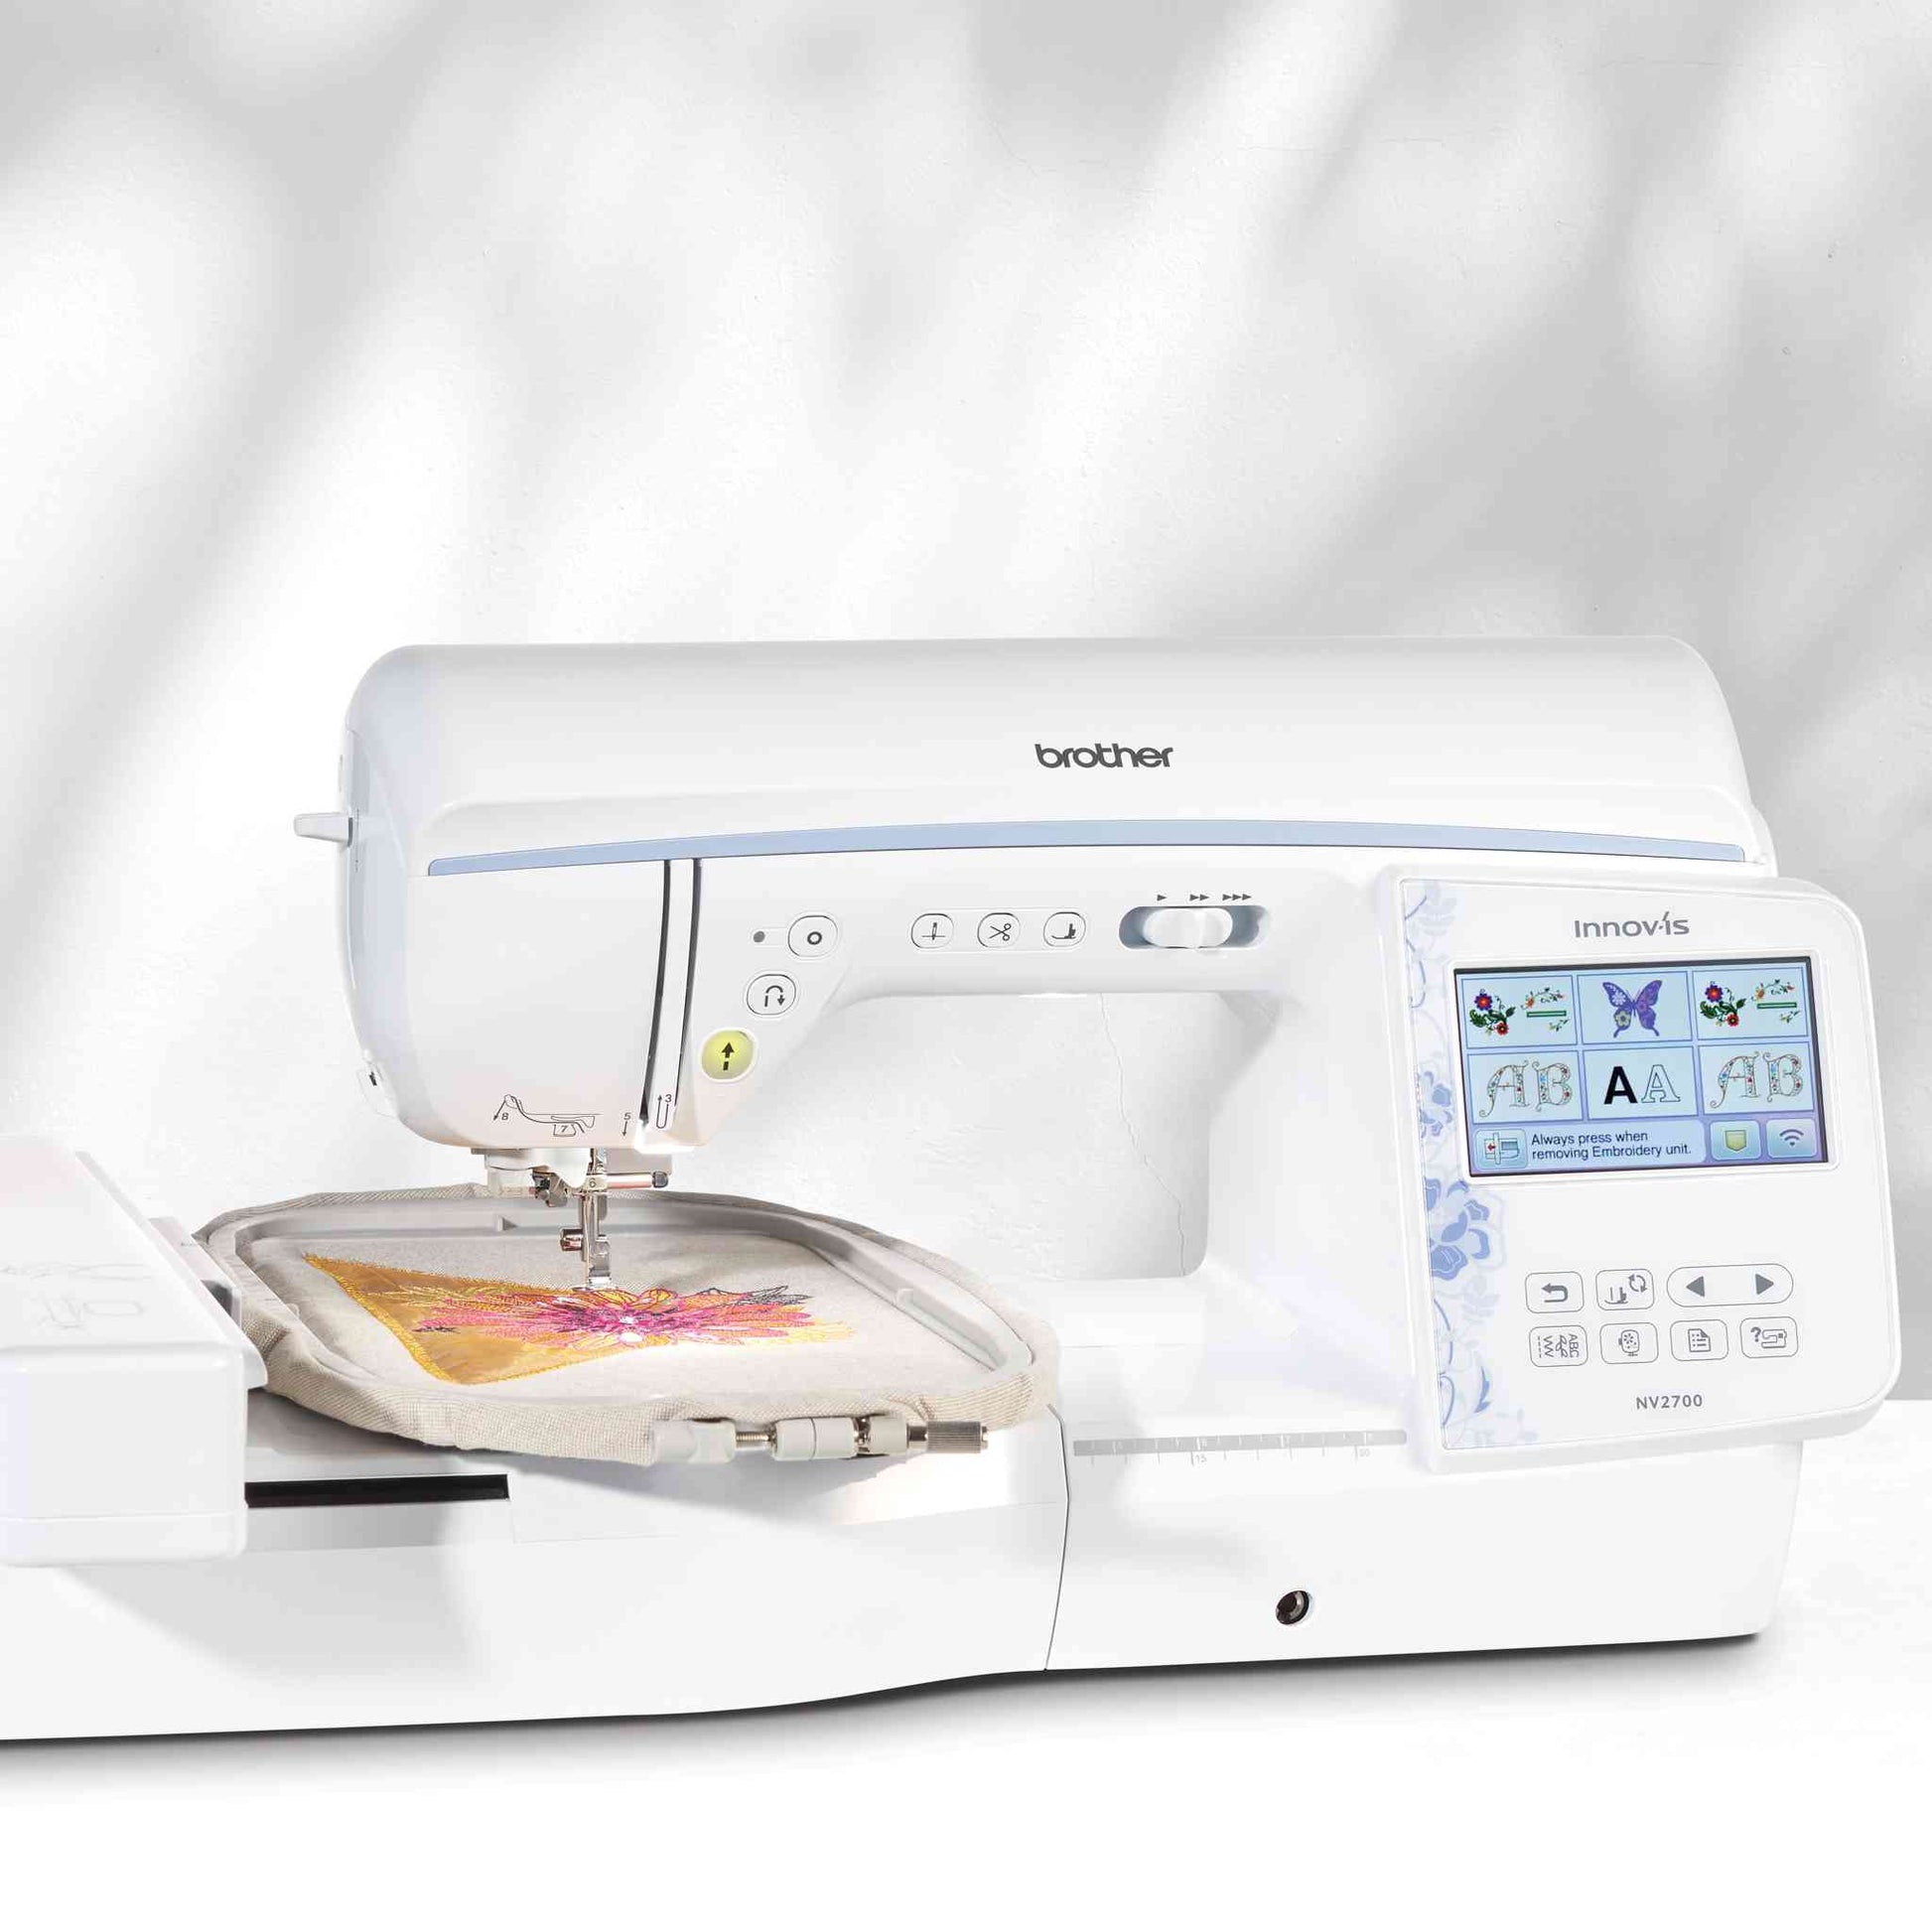 brother nv2700 sewing and embroidery machine with embroidery unit stitching out a thread design